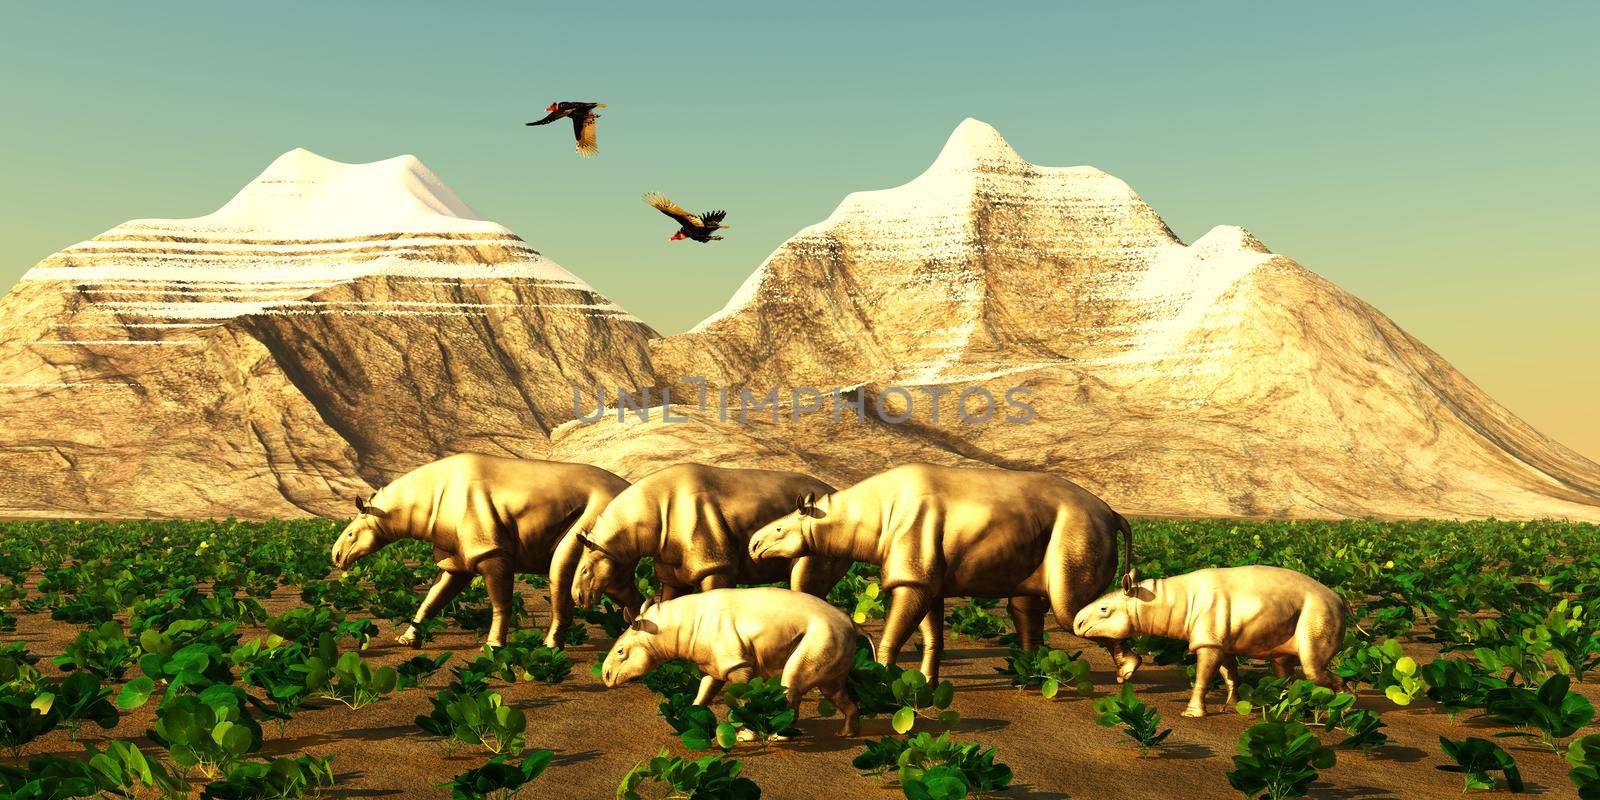 Turkey vultures fly over a herd of Paraceratherium mammals during the Eocene period of China.